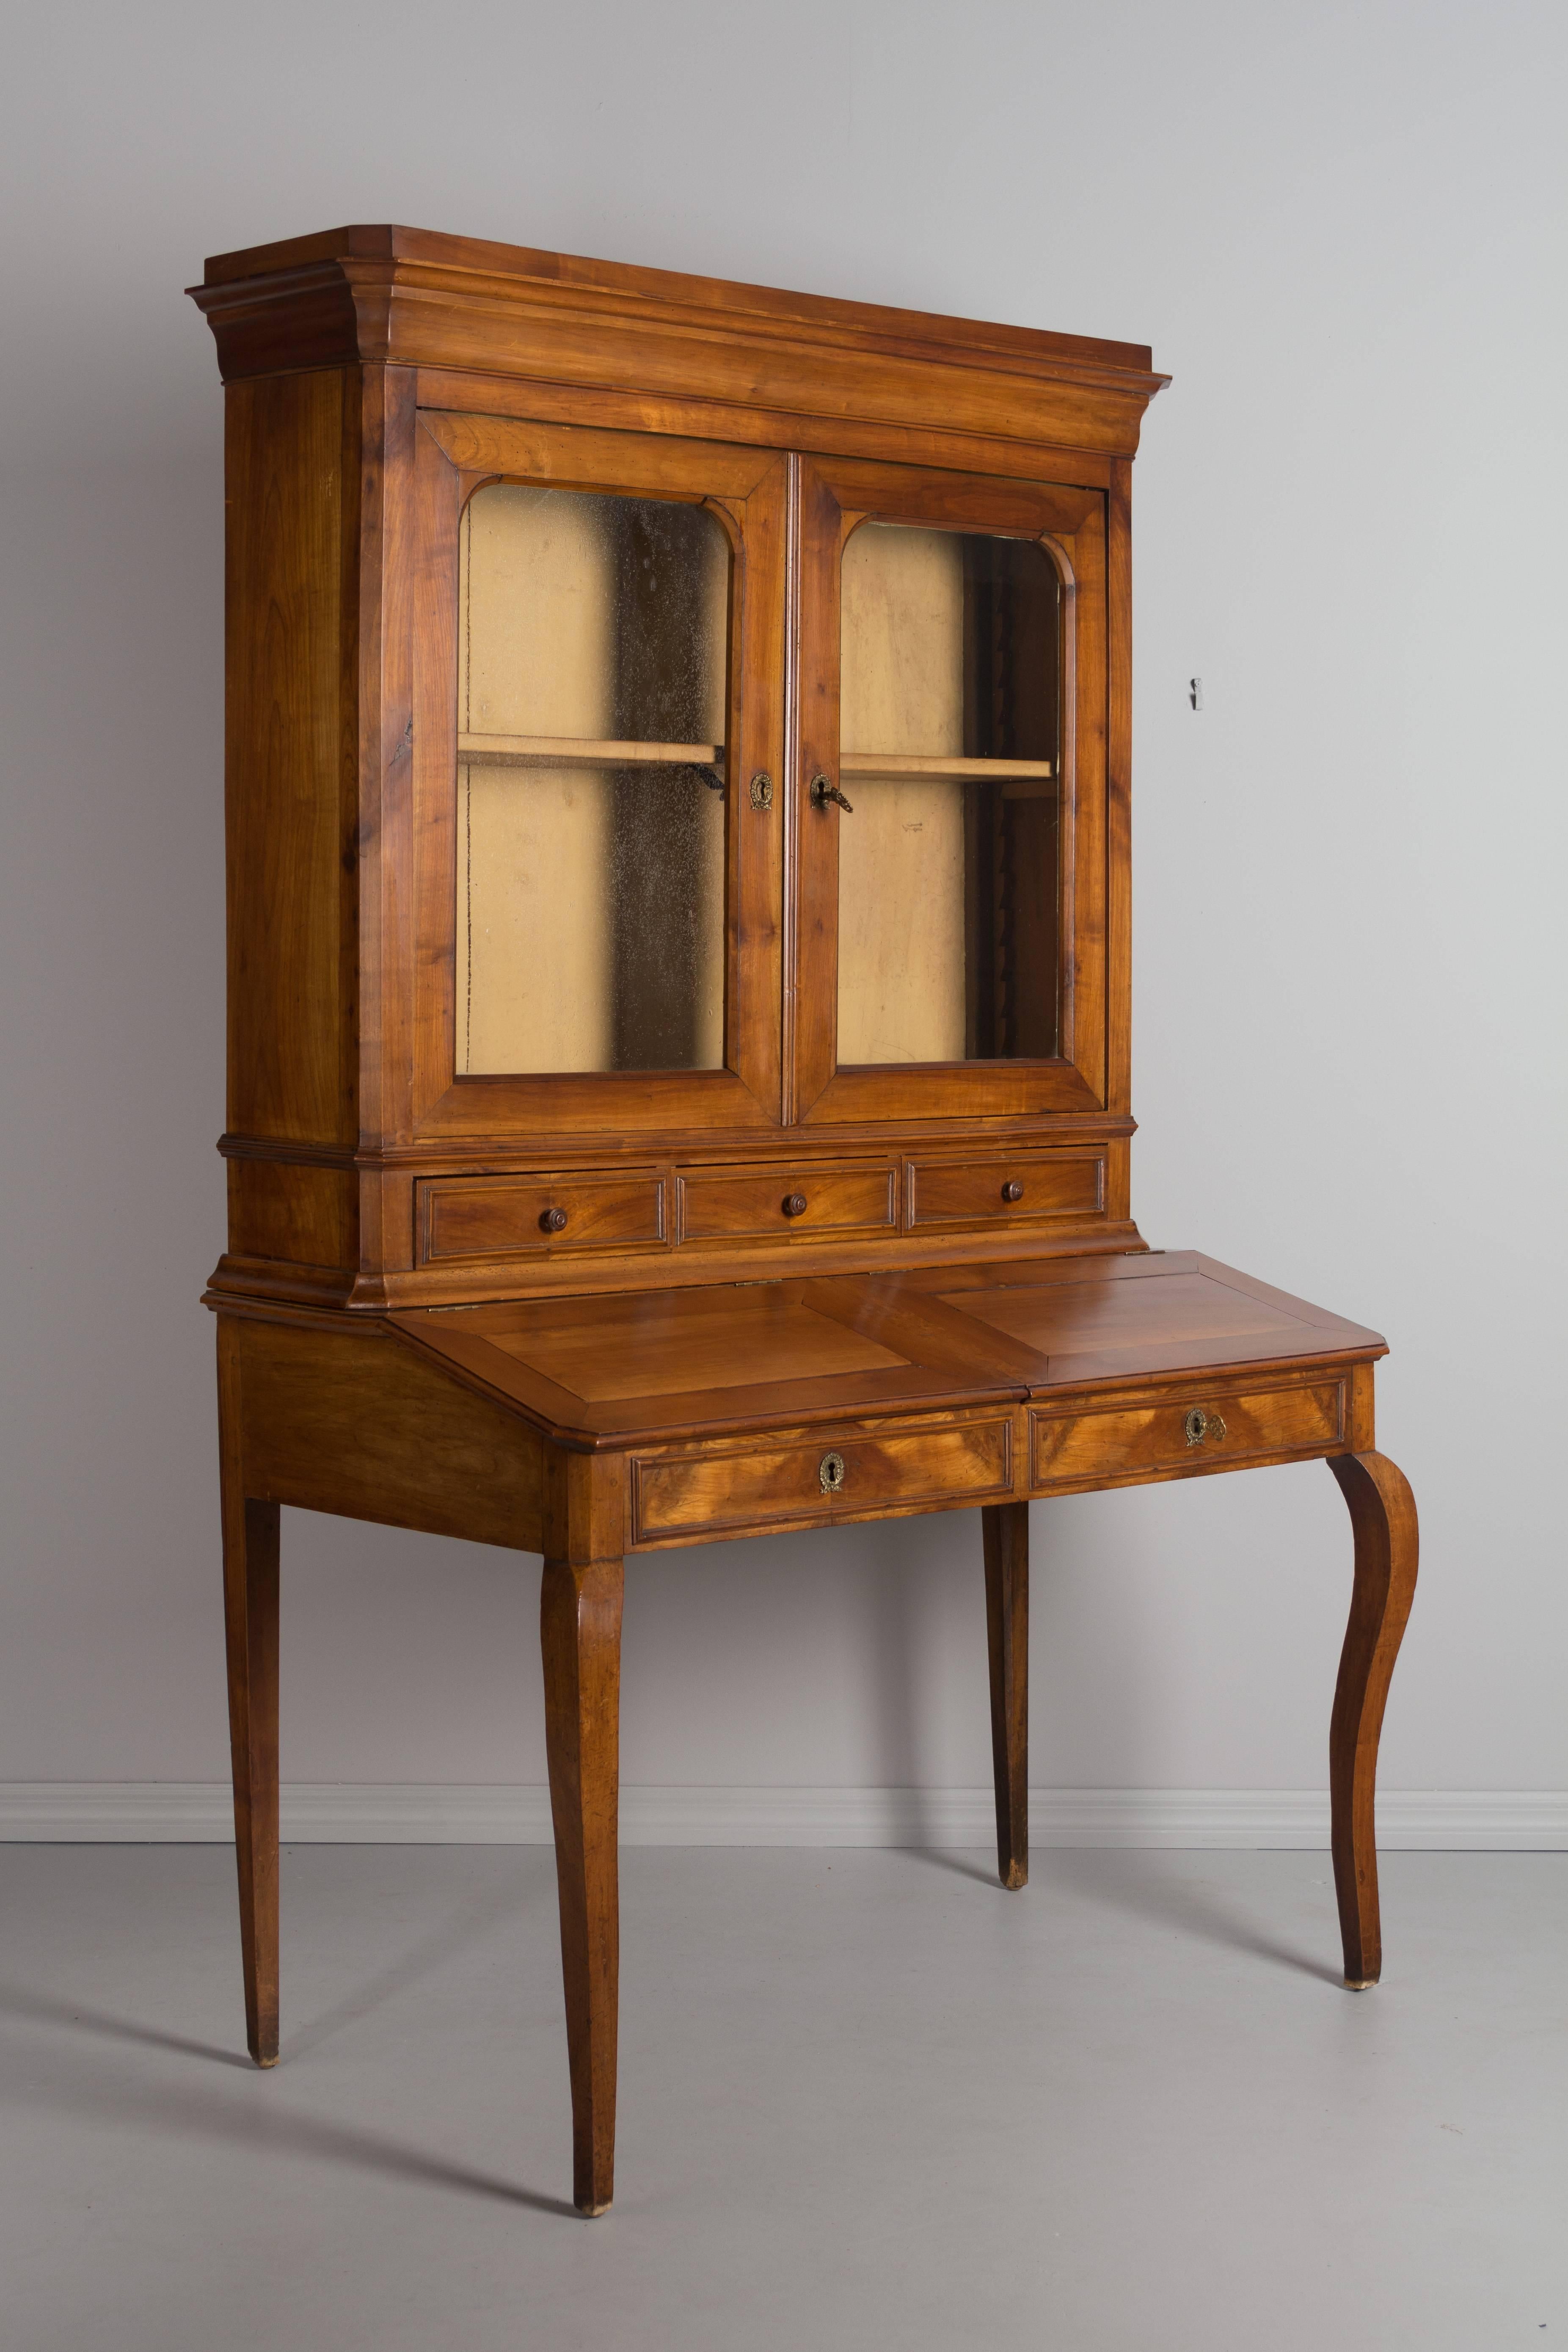 A 19th century Country French slant top desk with bookcase. Made of solid cherry with waxed patina. The top part has original glass paned doors opening to a single adjustable shelf above three dovetailed drawers with turned wood knobs. This desk was